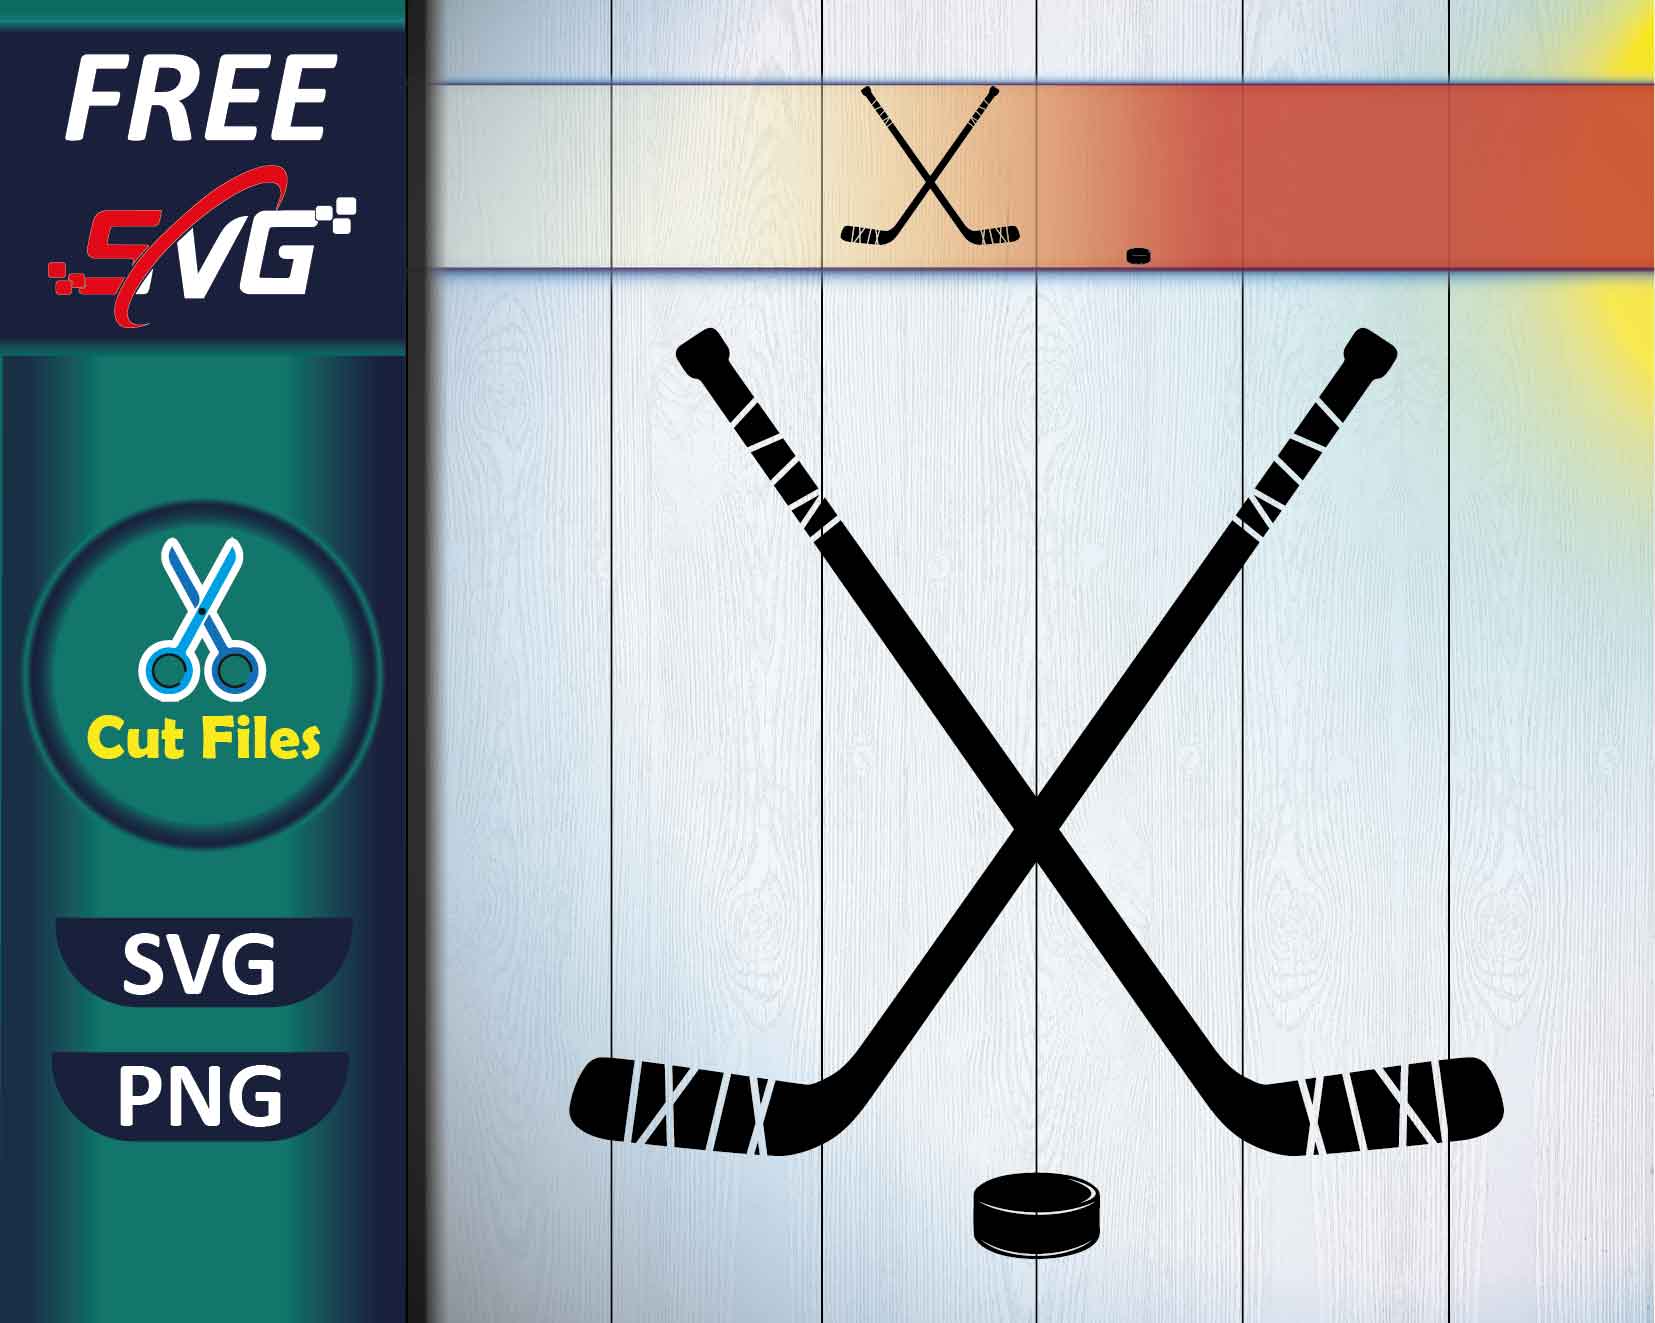 Hockey SVG, Crossed Hockey Sticks and Hockey Puck Name Frame SVG, Digital  Download Svg/Png/Dxf/Eps files, for Cricut, Silhouette Cut Files.